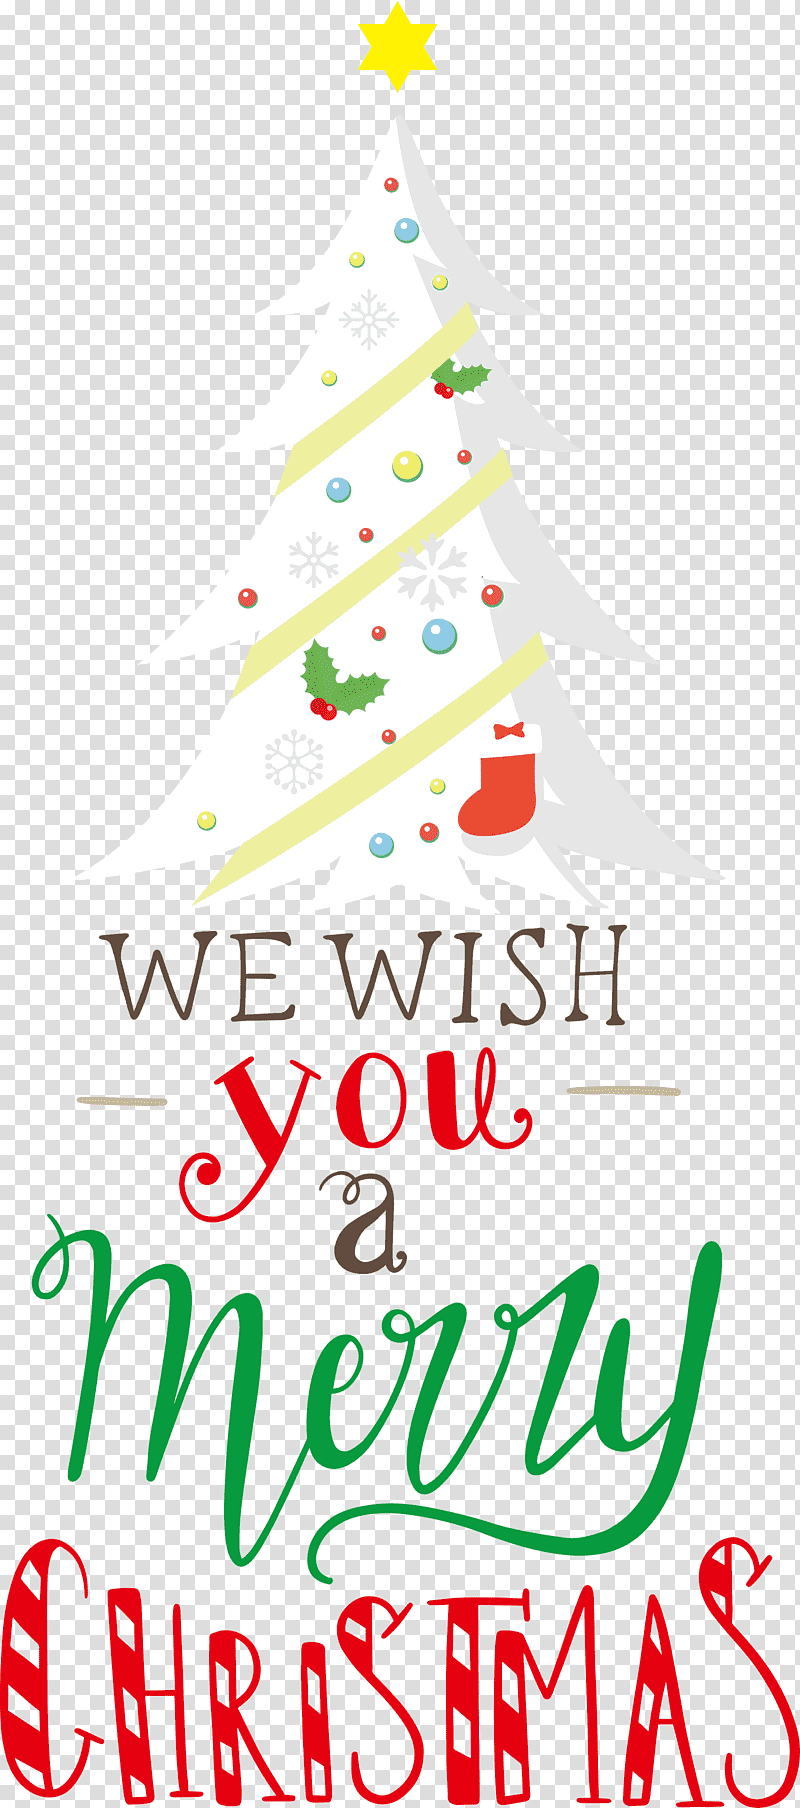 Merry Christmas We Wish You A Merry Christmas, Christmas Tree, Christmas Day, Holiday Ornament, Spruce, Christmas Ornament, Christmas Ornament M transparent background PNG clipart